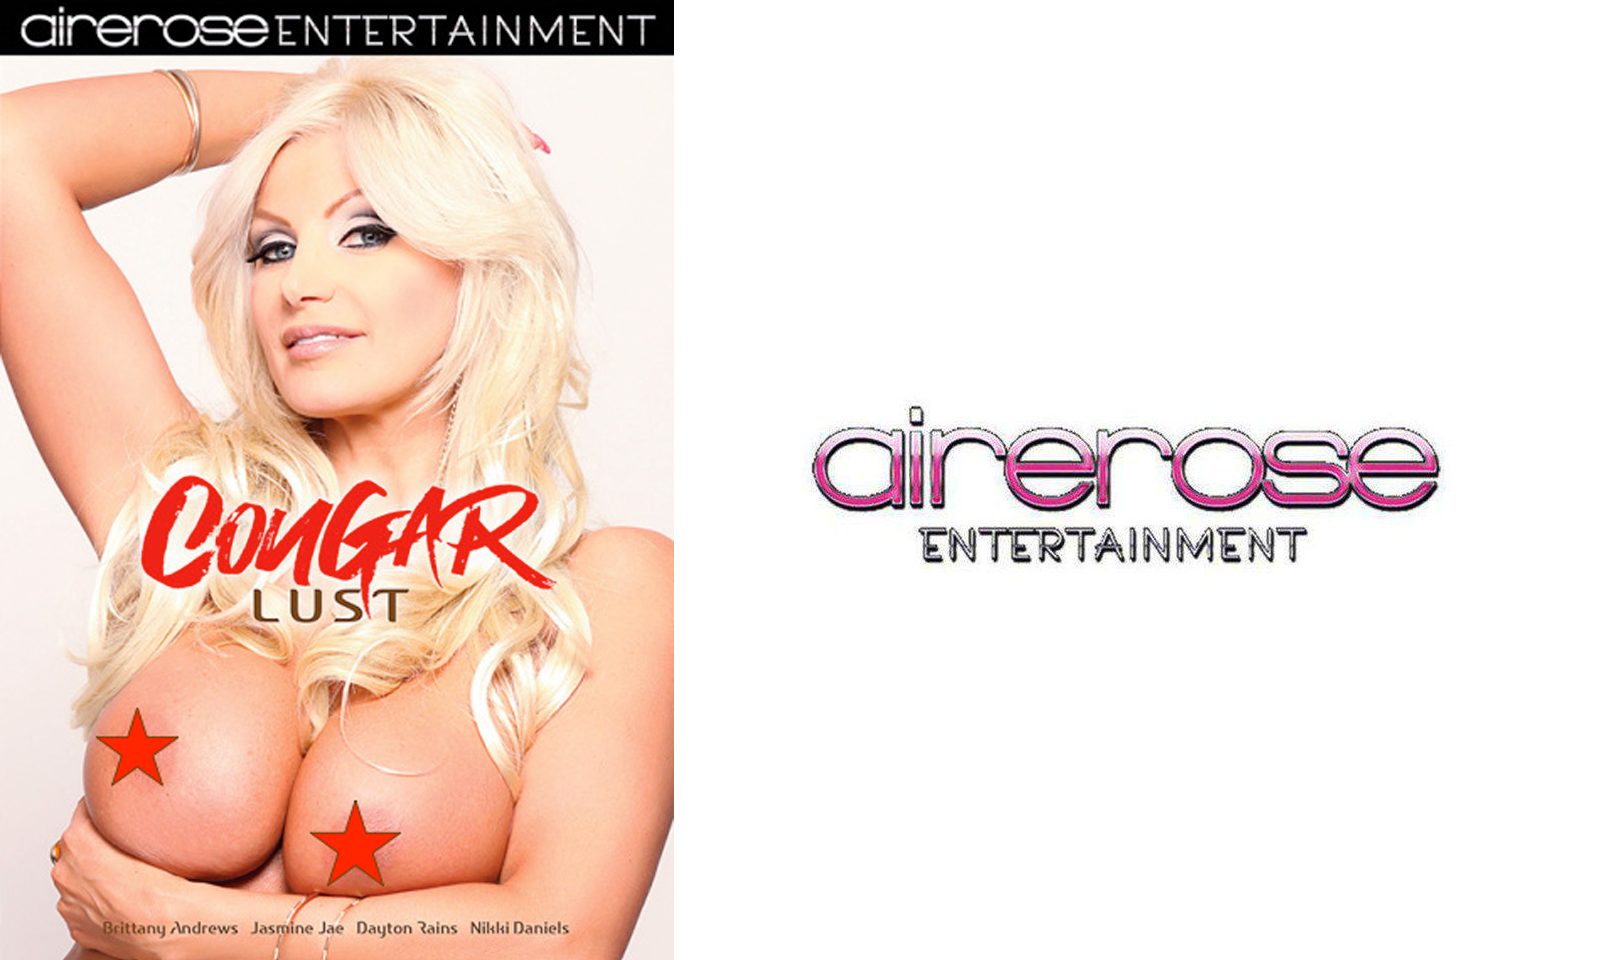 ‘Cougar Lust’ Streets From Airerose Entertainment